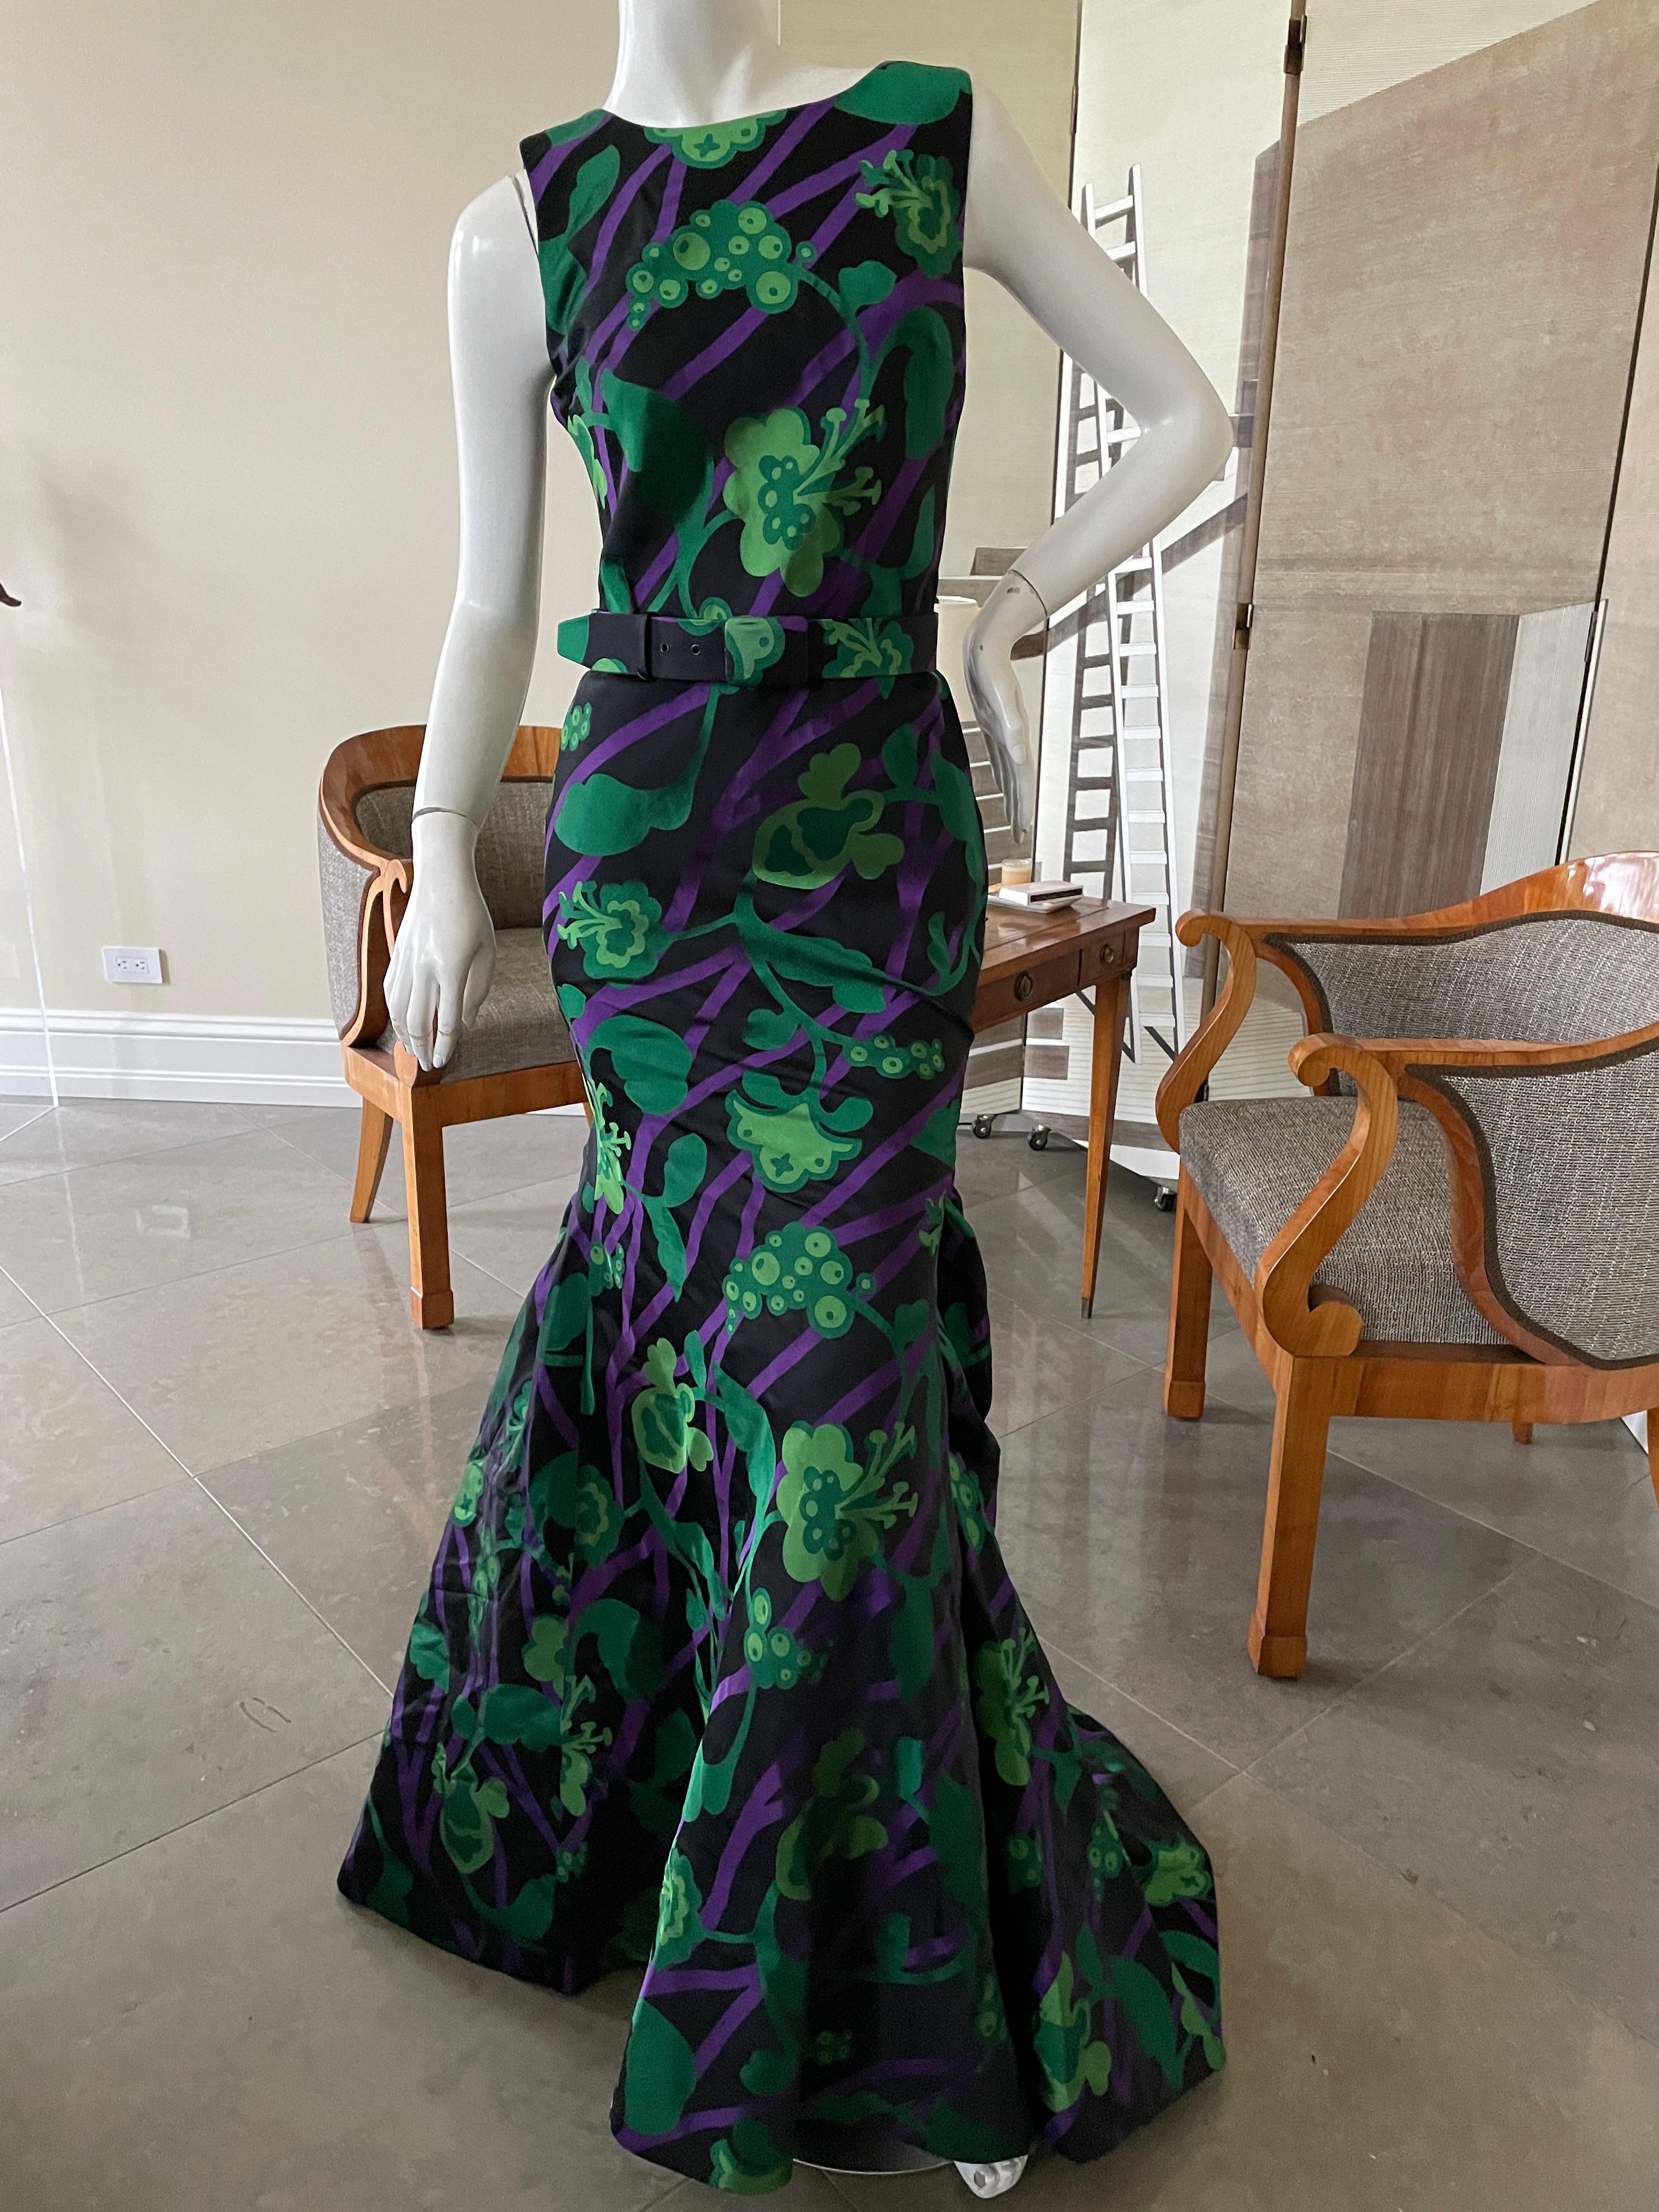 Oscar de la Renta Vintage Floral Evening Dress with Grand Mermaid Train and Belt In Excellent Condition For Sale In Cloverdale, CA